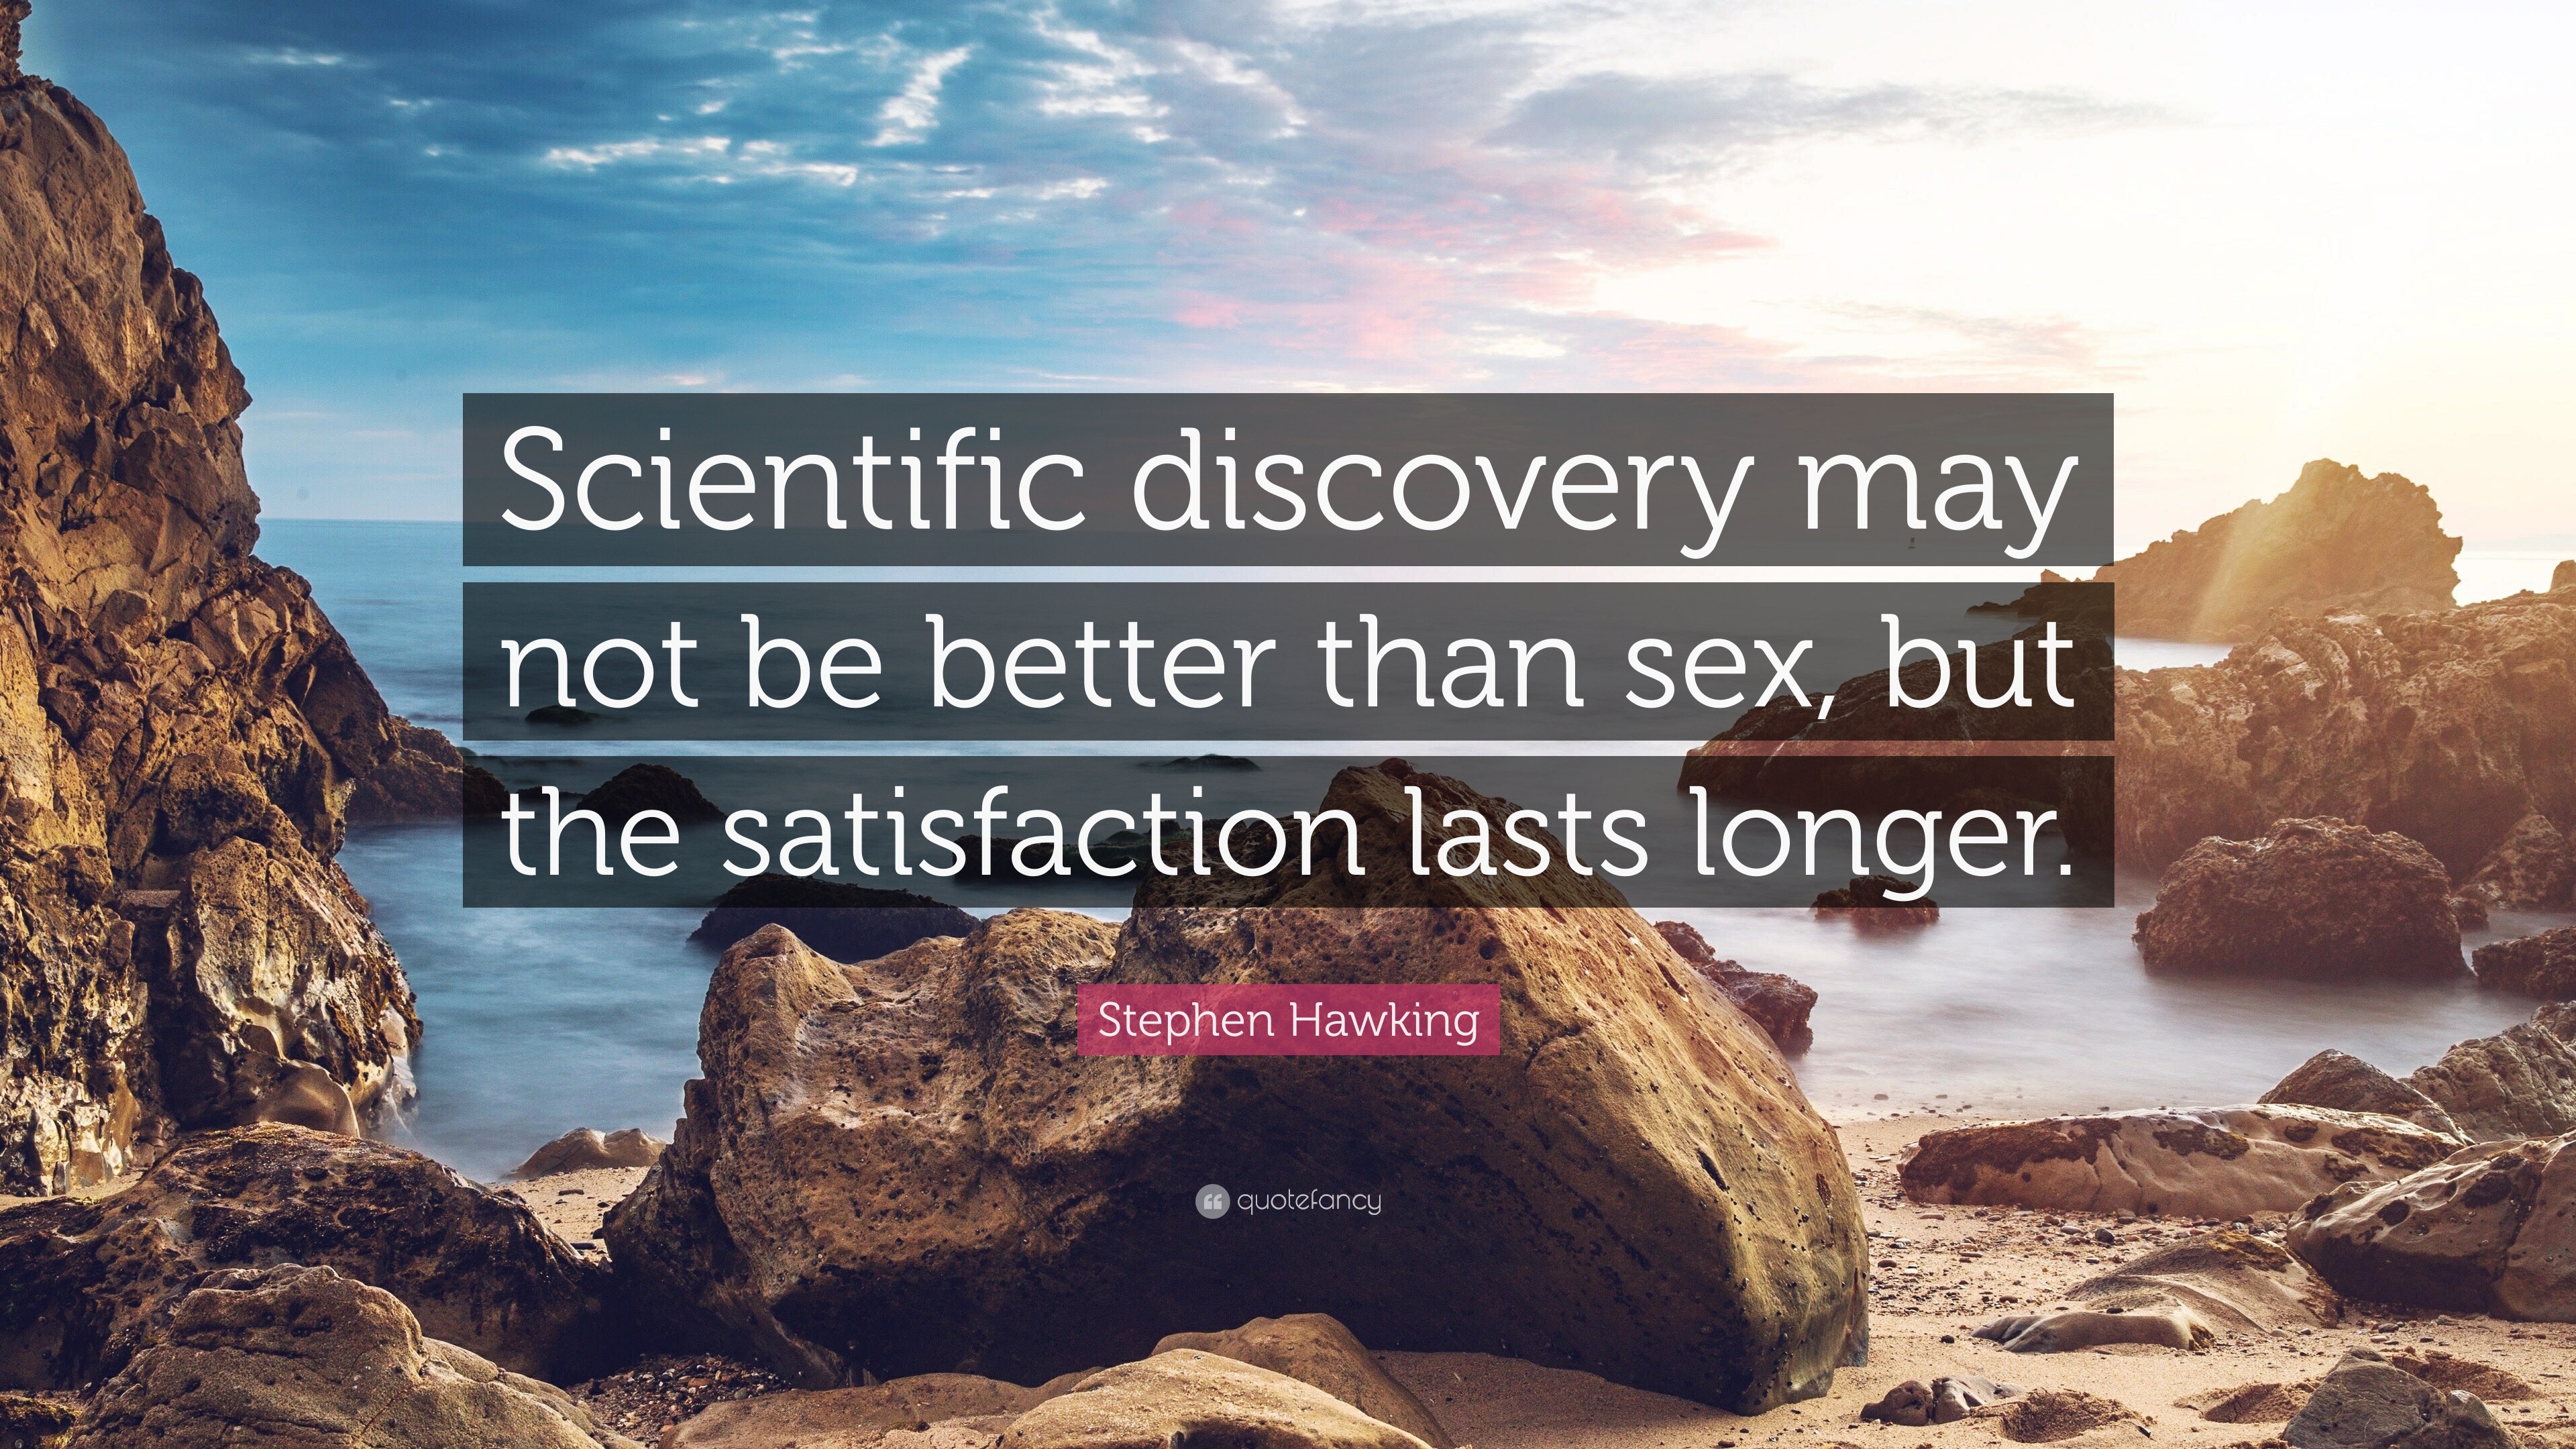 Stephen Hawking Quote “scientific Discovery May Not Be Better Than Sex But The Satisfaction 8131